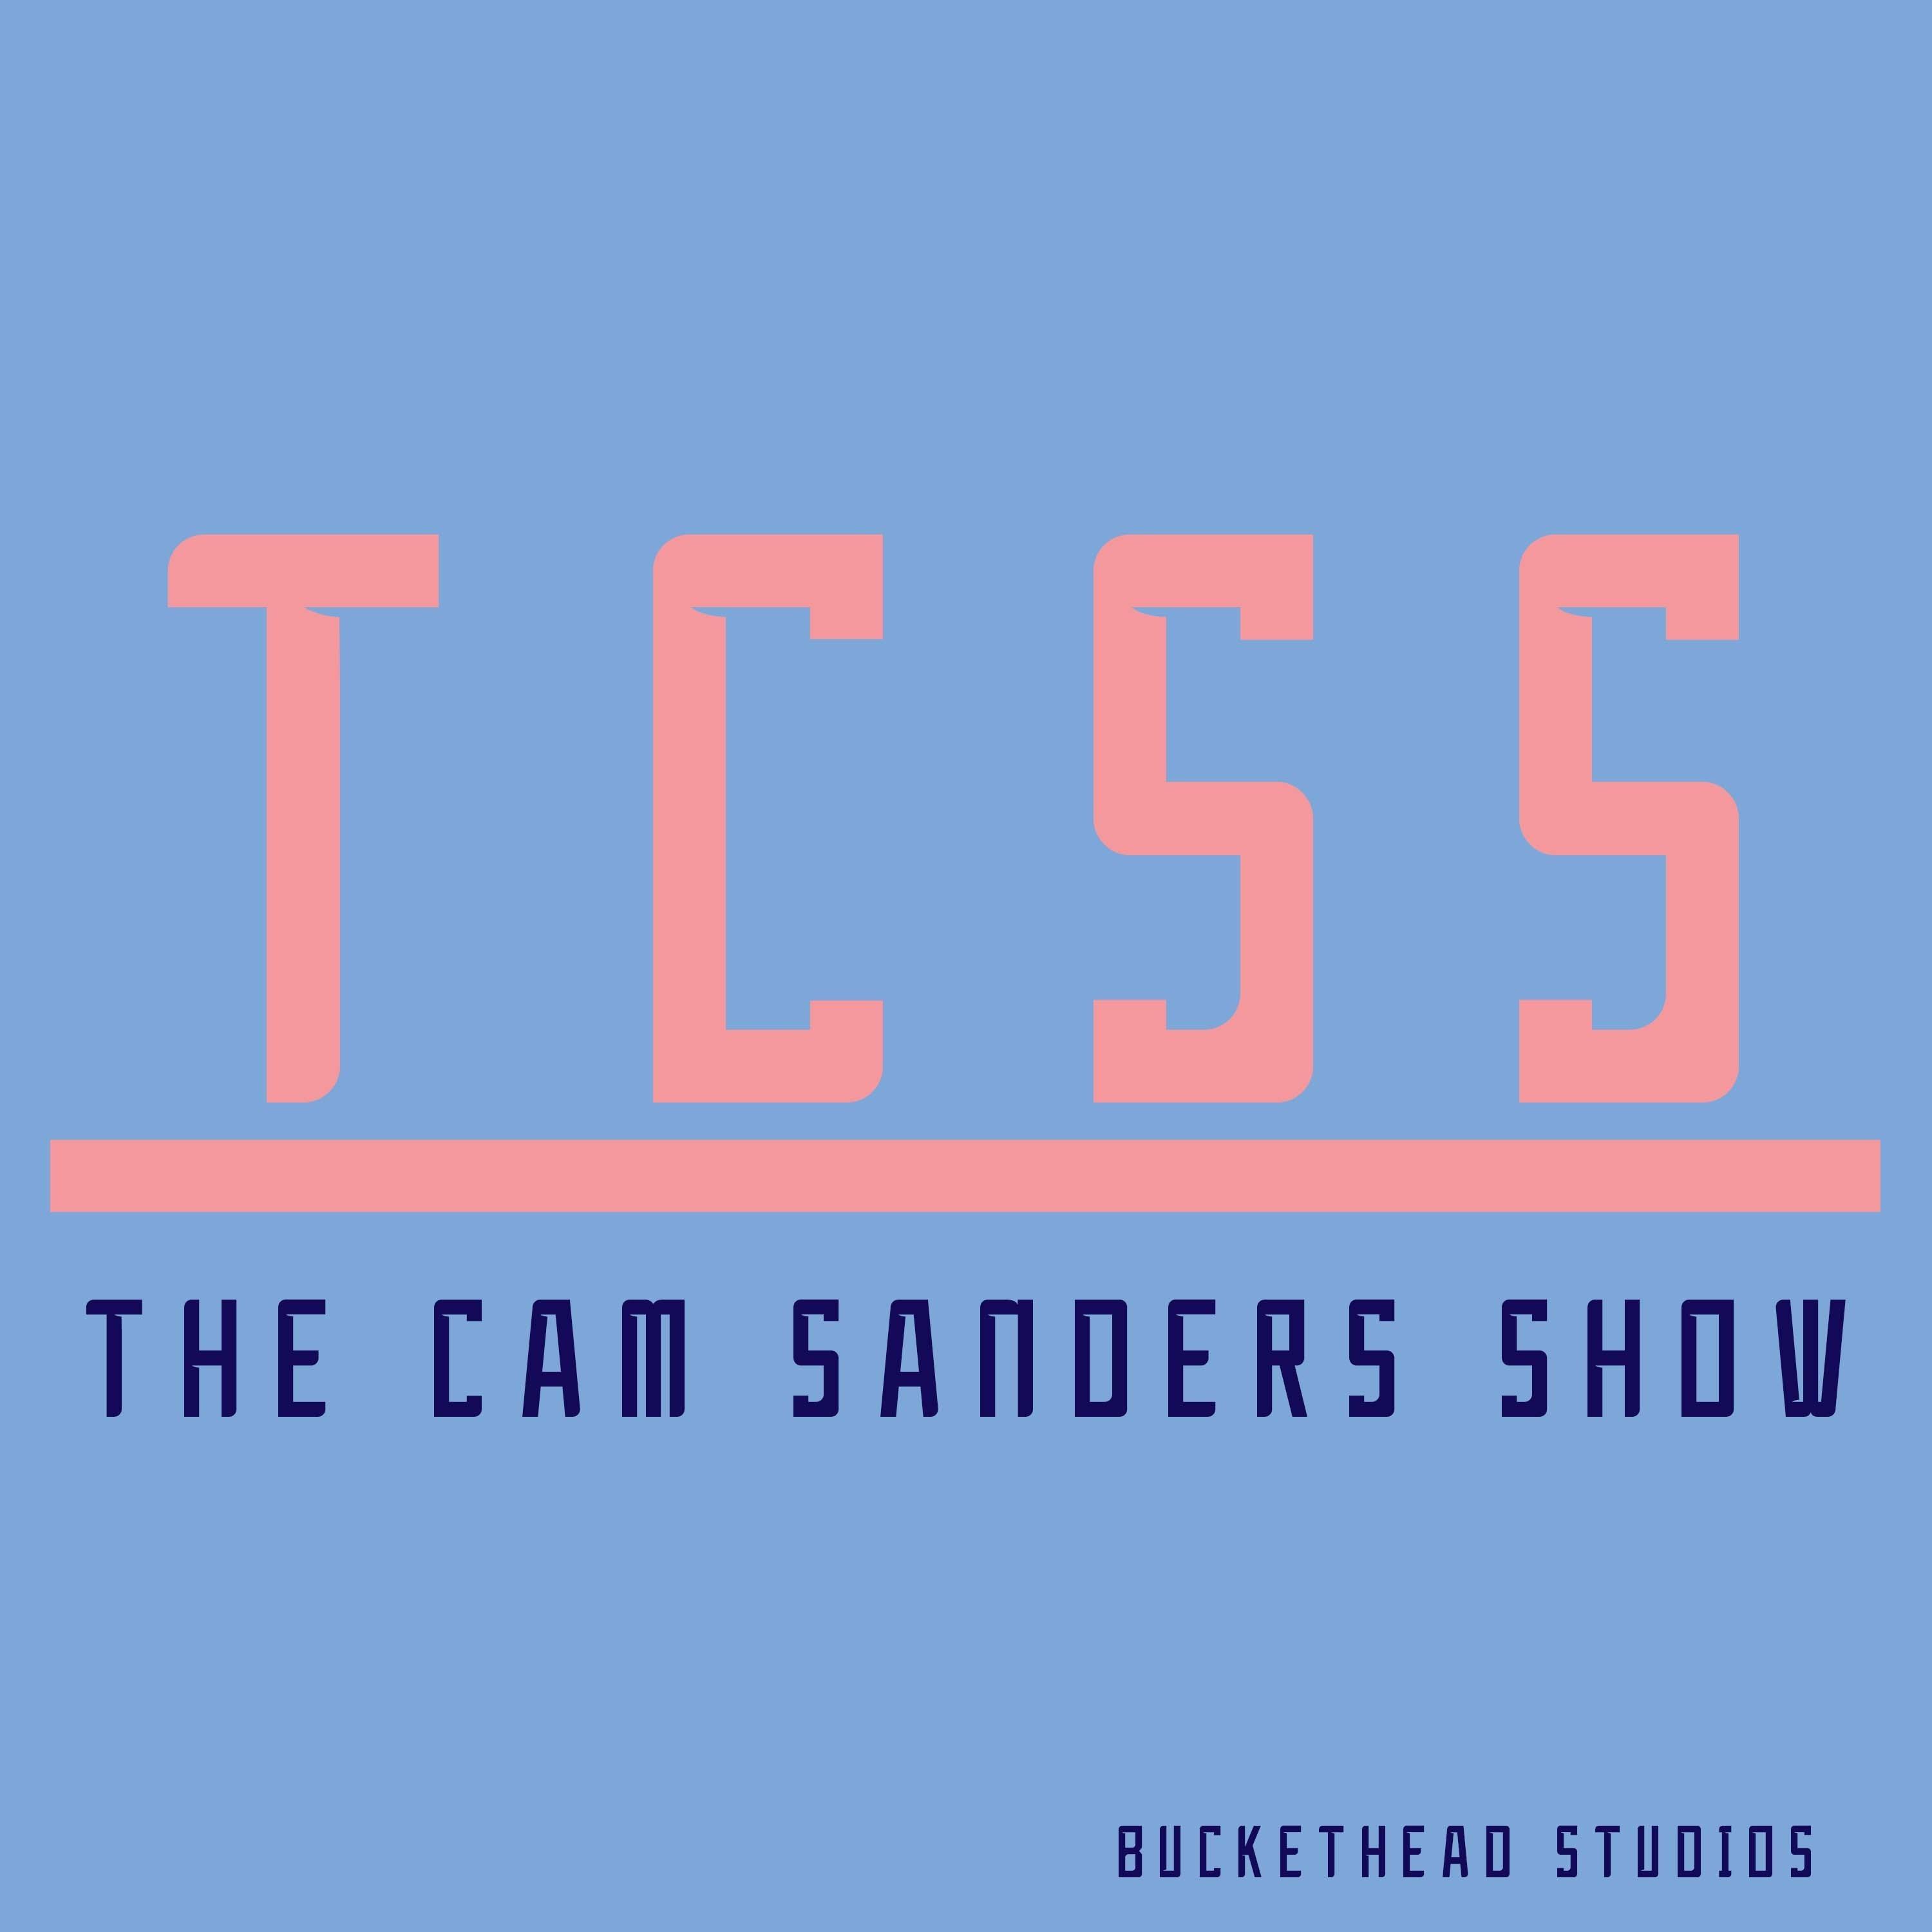 The Cam Sanders Show